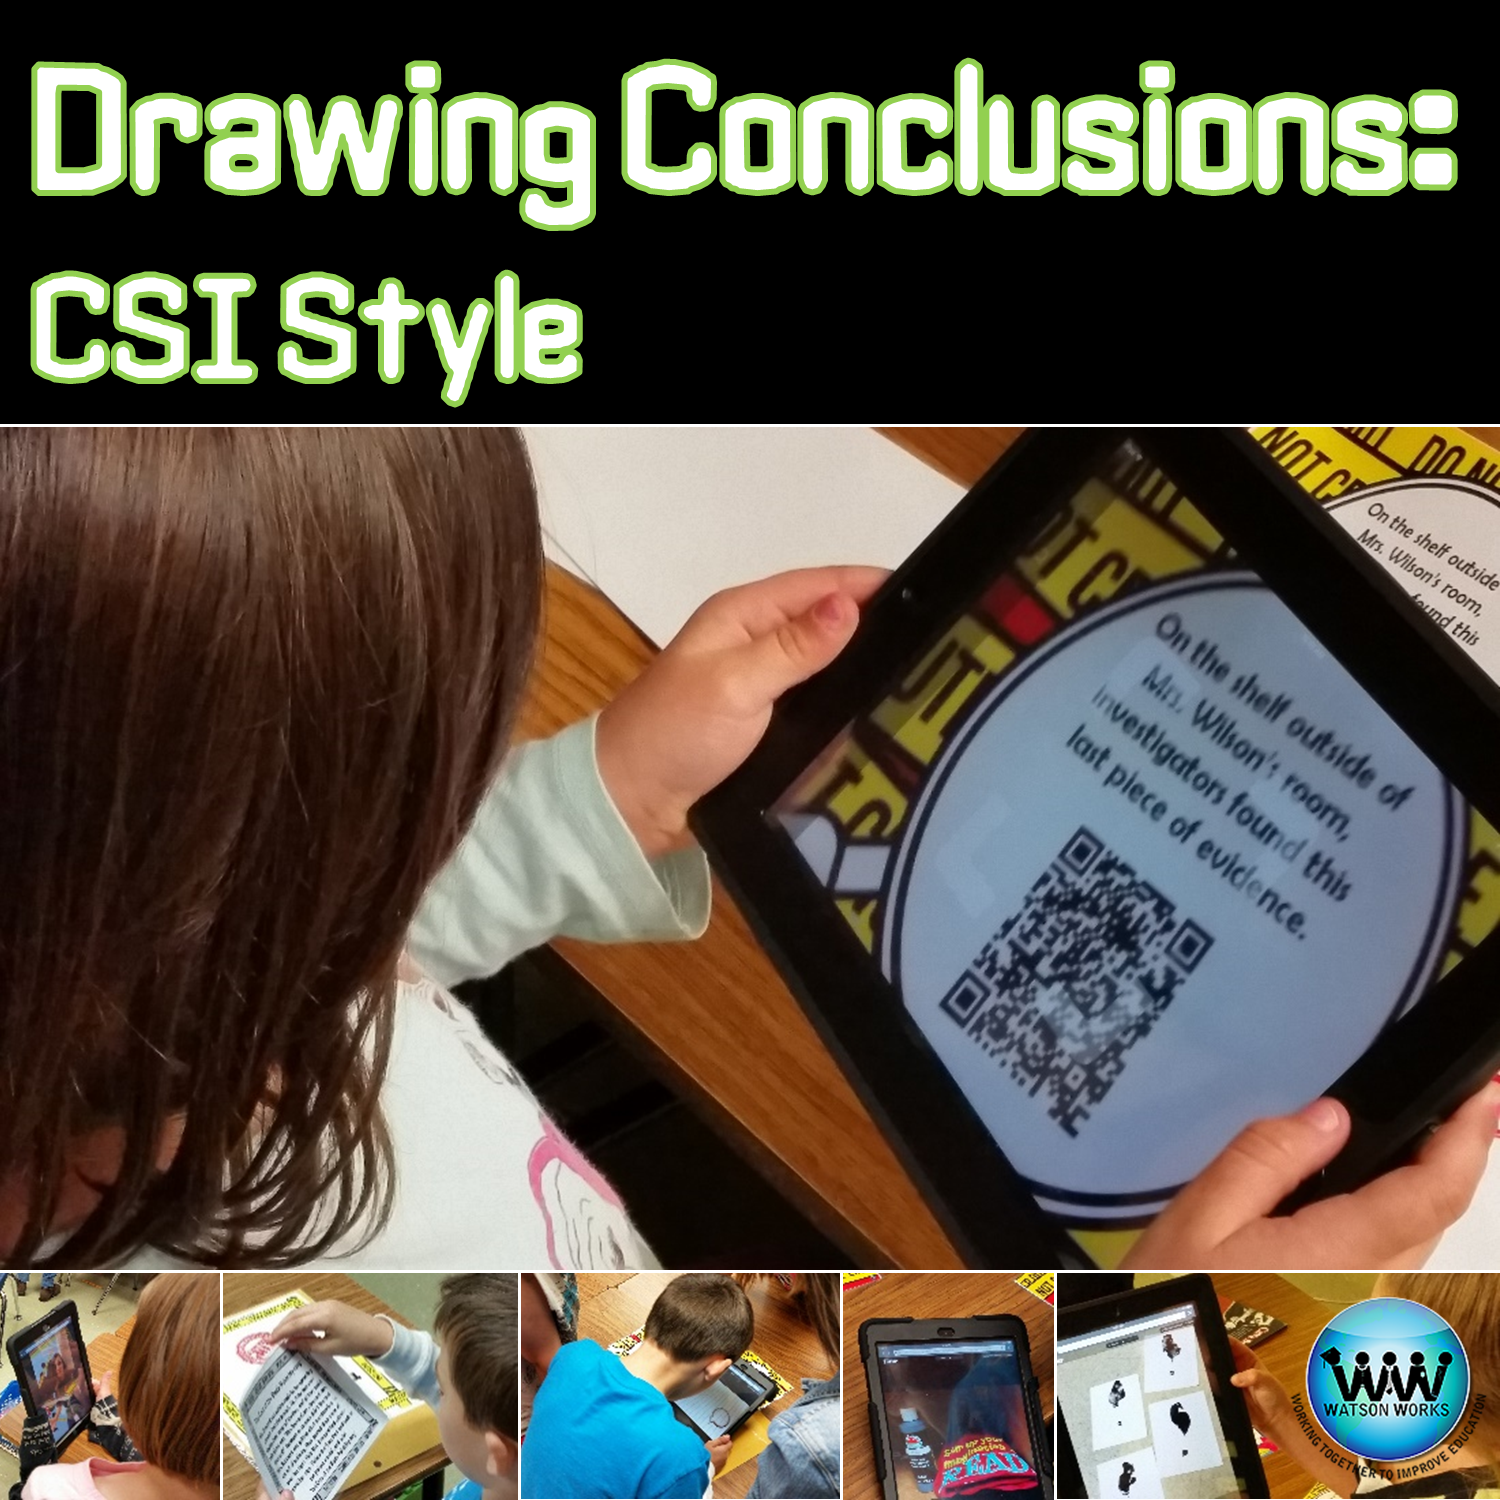 http://www.teacherspayteachers.com/Product/CSI-Drawing-Conclusions-Activity-with-QR-Codes-1505739